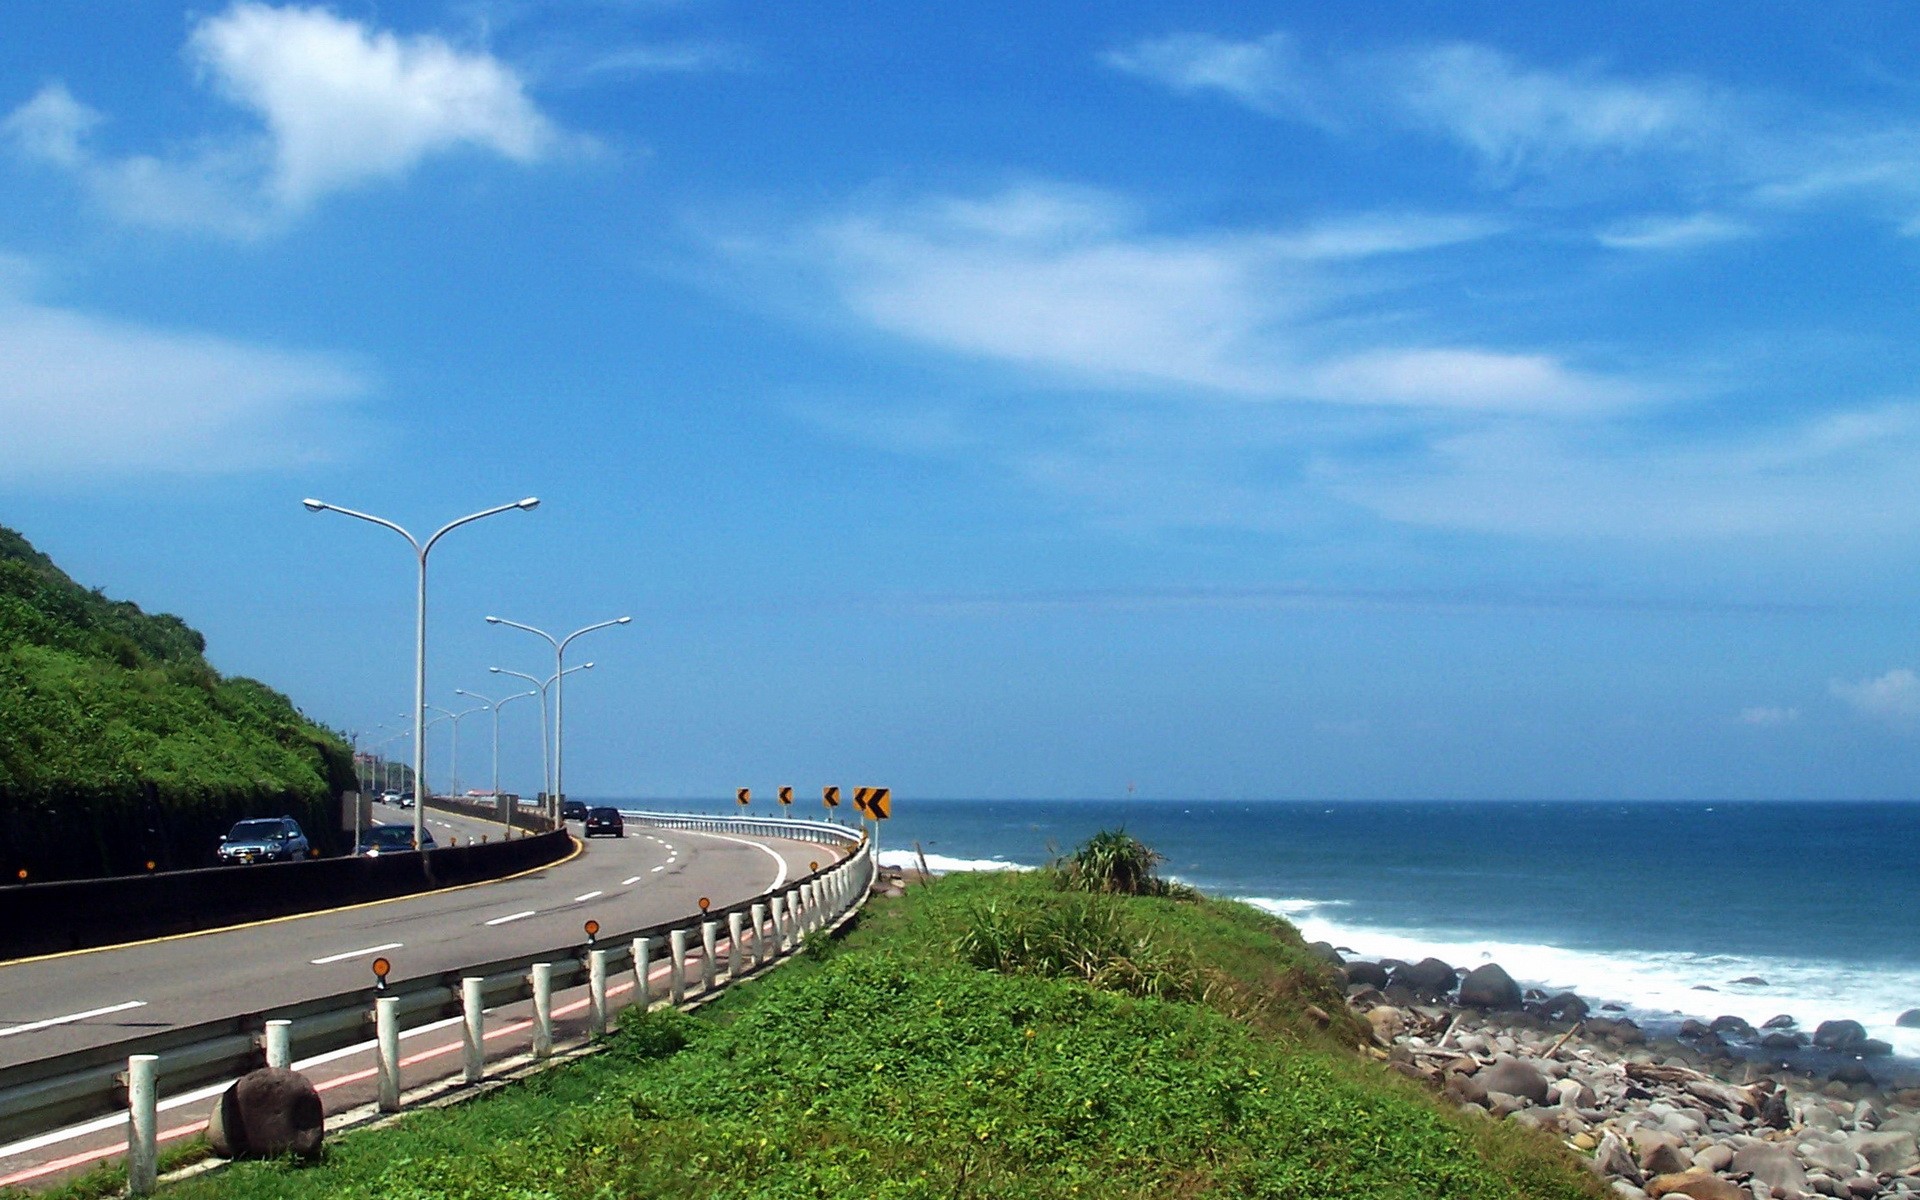 clouds, Nature, Coast, Roads, Taiwan, Roadsigns, Skyscapes, Blue, Skies, Sea Wallpaper